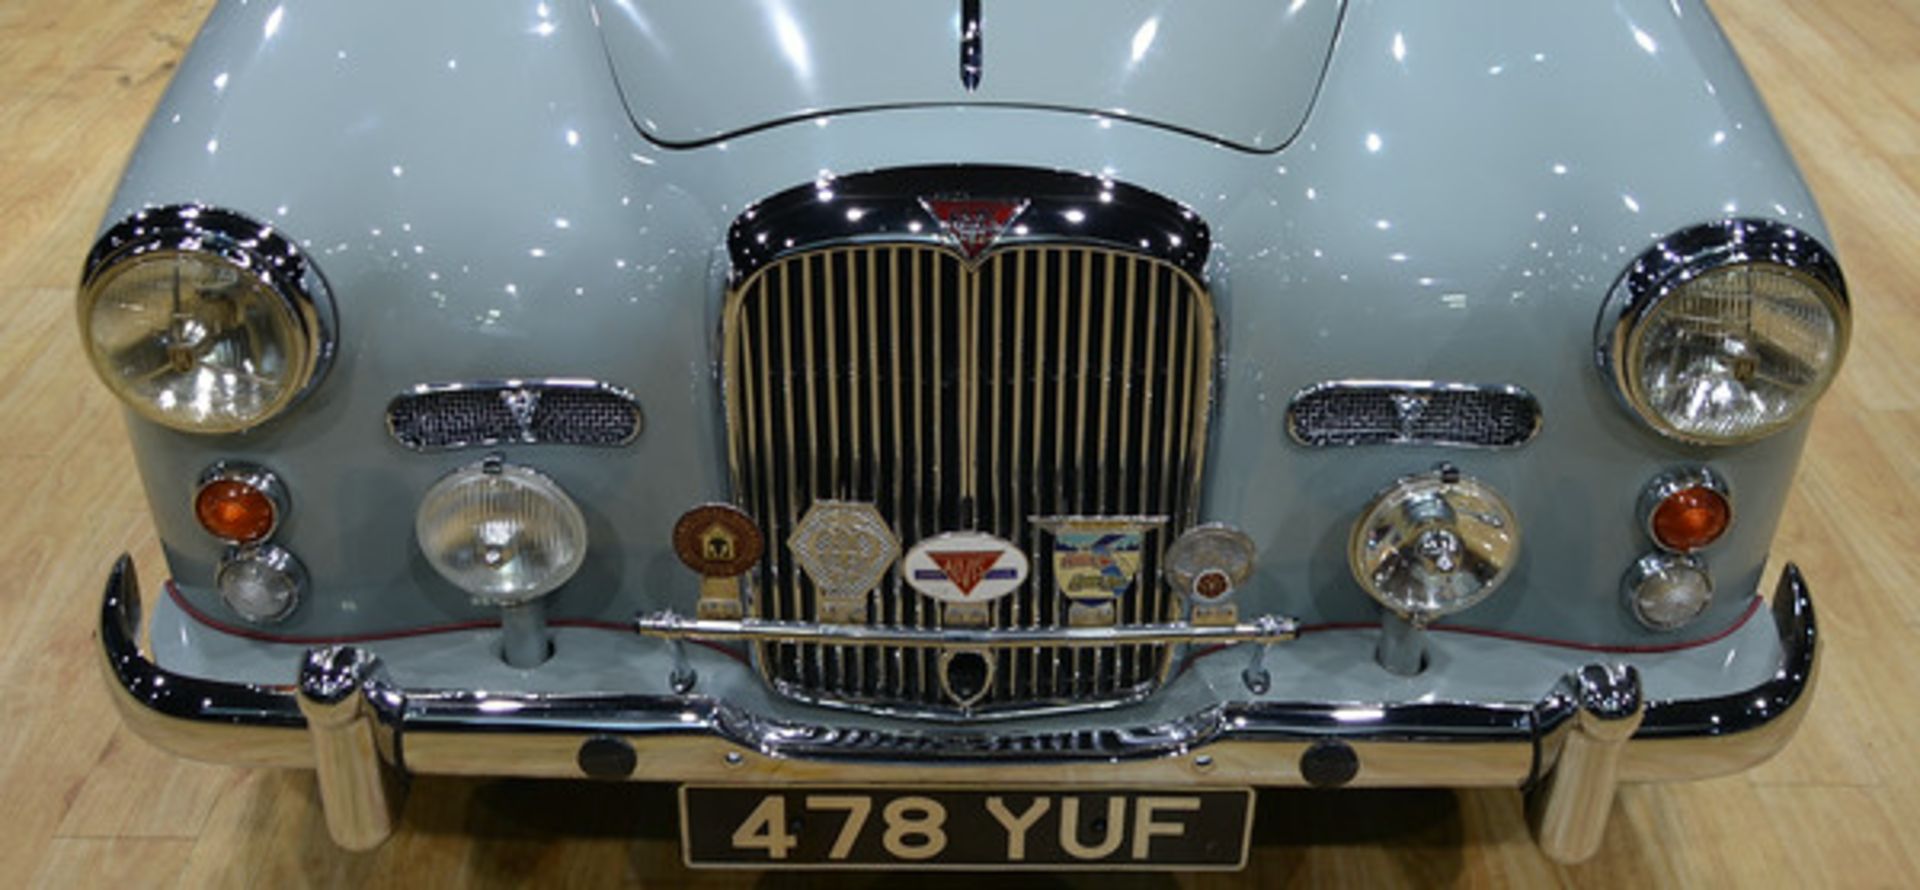 1960 Alvis TD21 Convertible.  Chassis Number: 26219 
Registration number: 478YUF  Recipient of a - Image 11 of 19